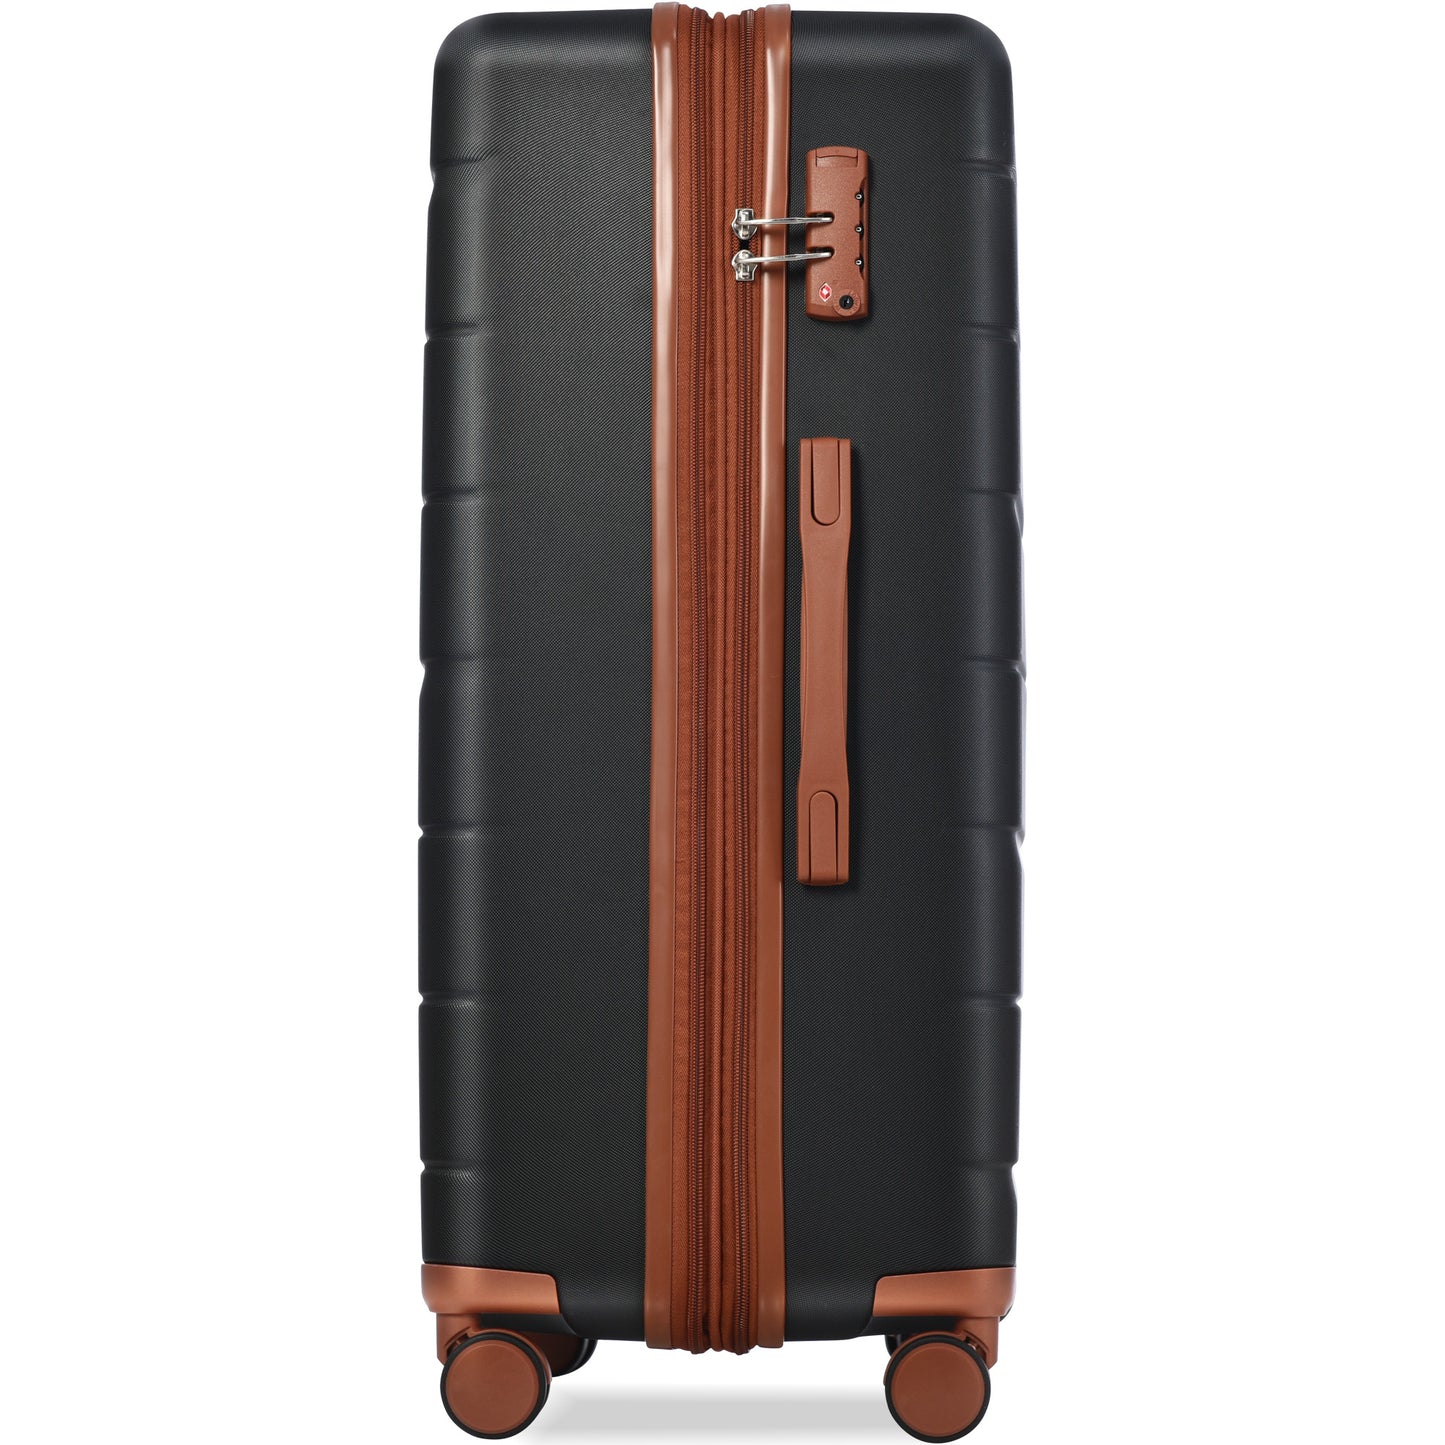 Luggage Sets 4 Piece Carry On Luggage Suitcase Set with 360° Spinner Wheels black and brown